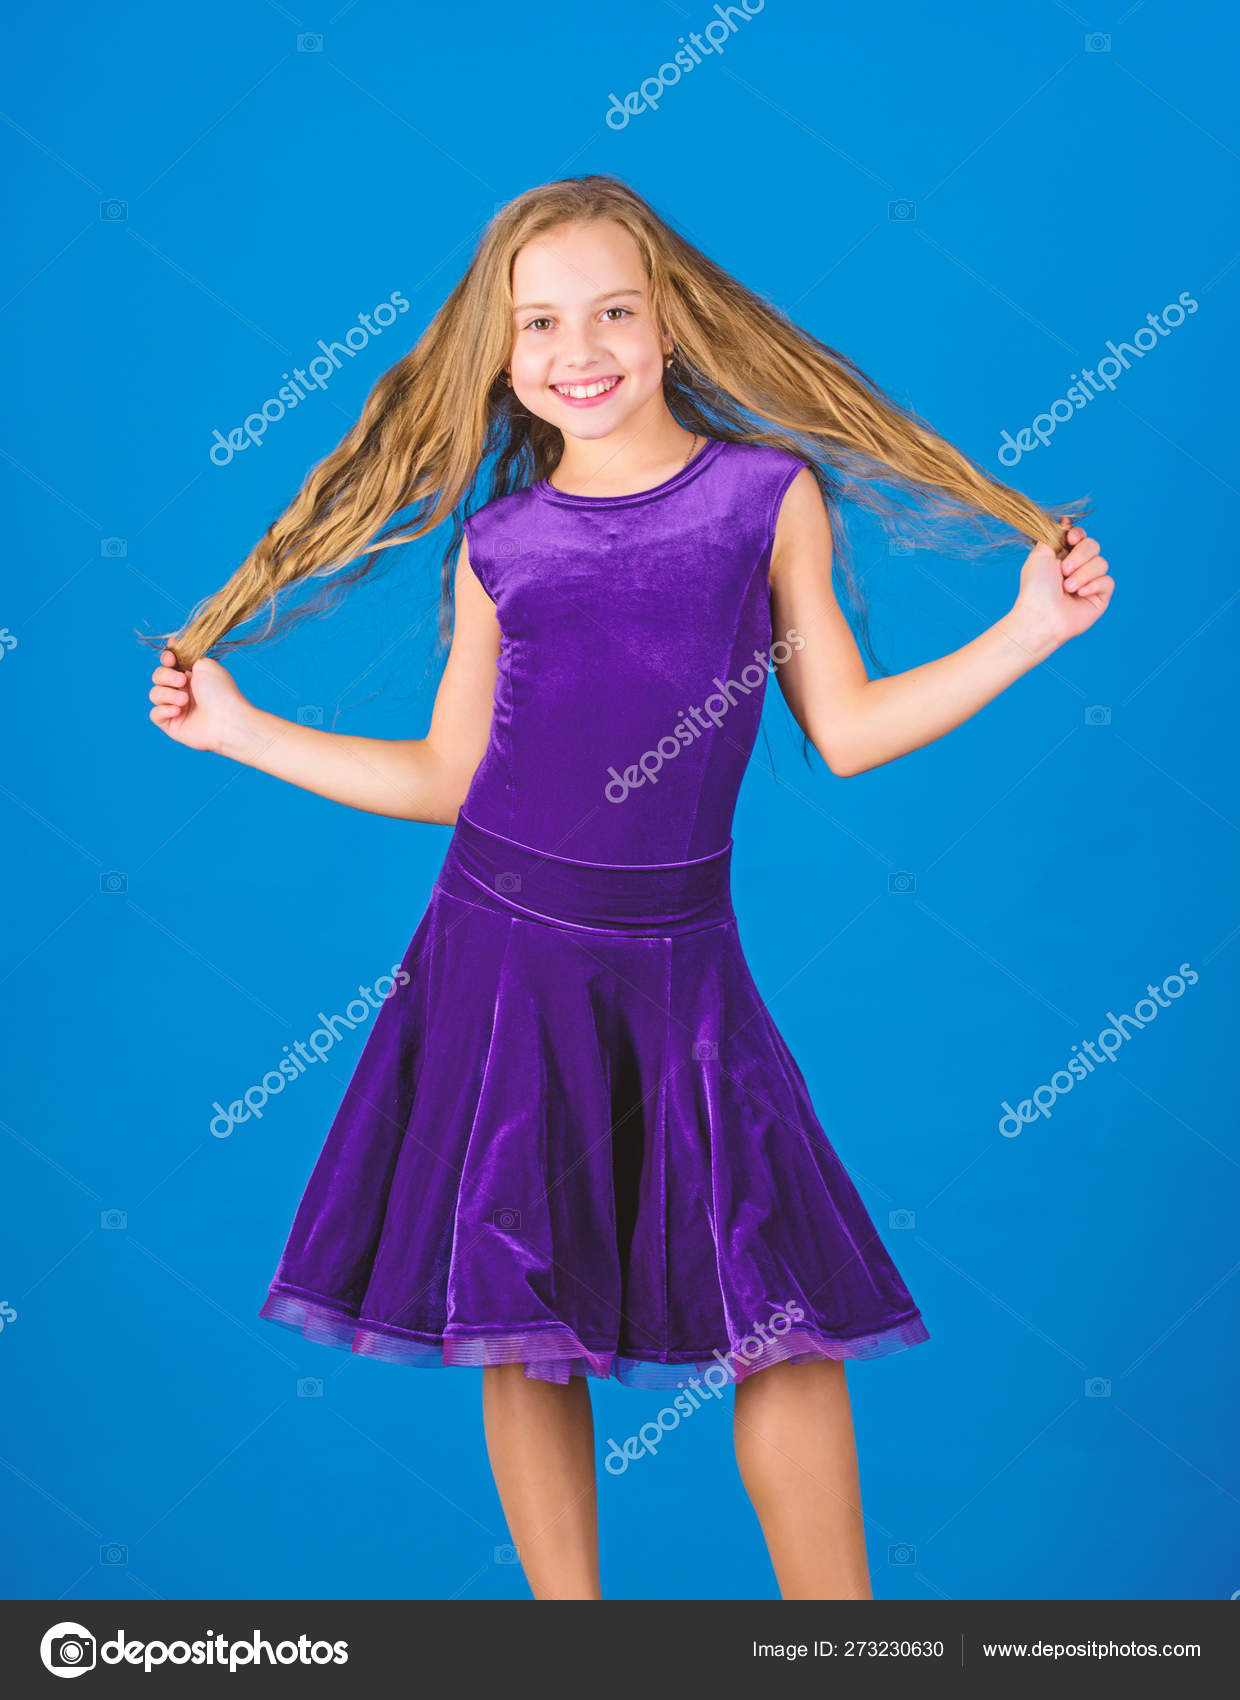 Kid Girl With Long Hair Wear Dress On Blue Background